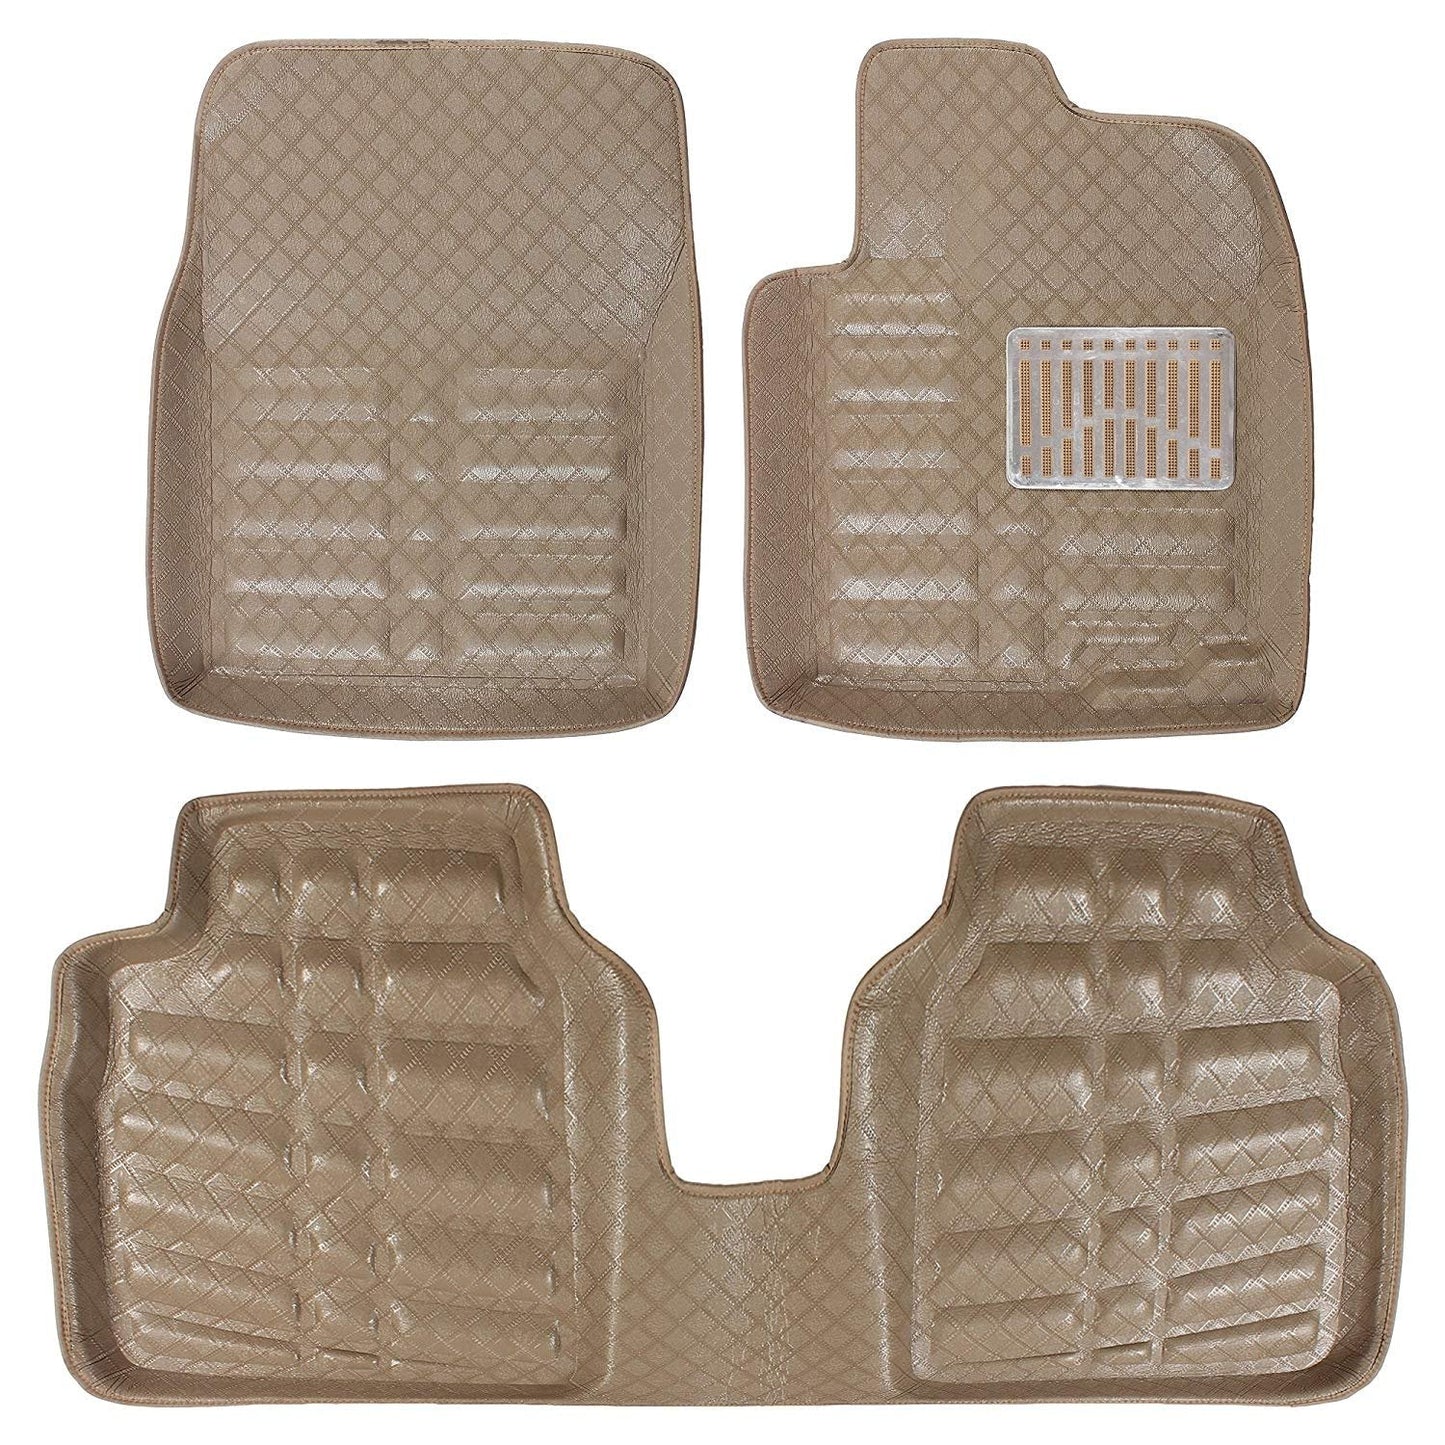 Oshotto 4D Beige Car Tray Mats For Toyota Glanza All Models - Set of 3 (2 pcs Front & one Long Single Rear pc)